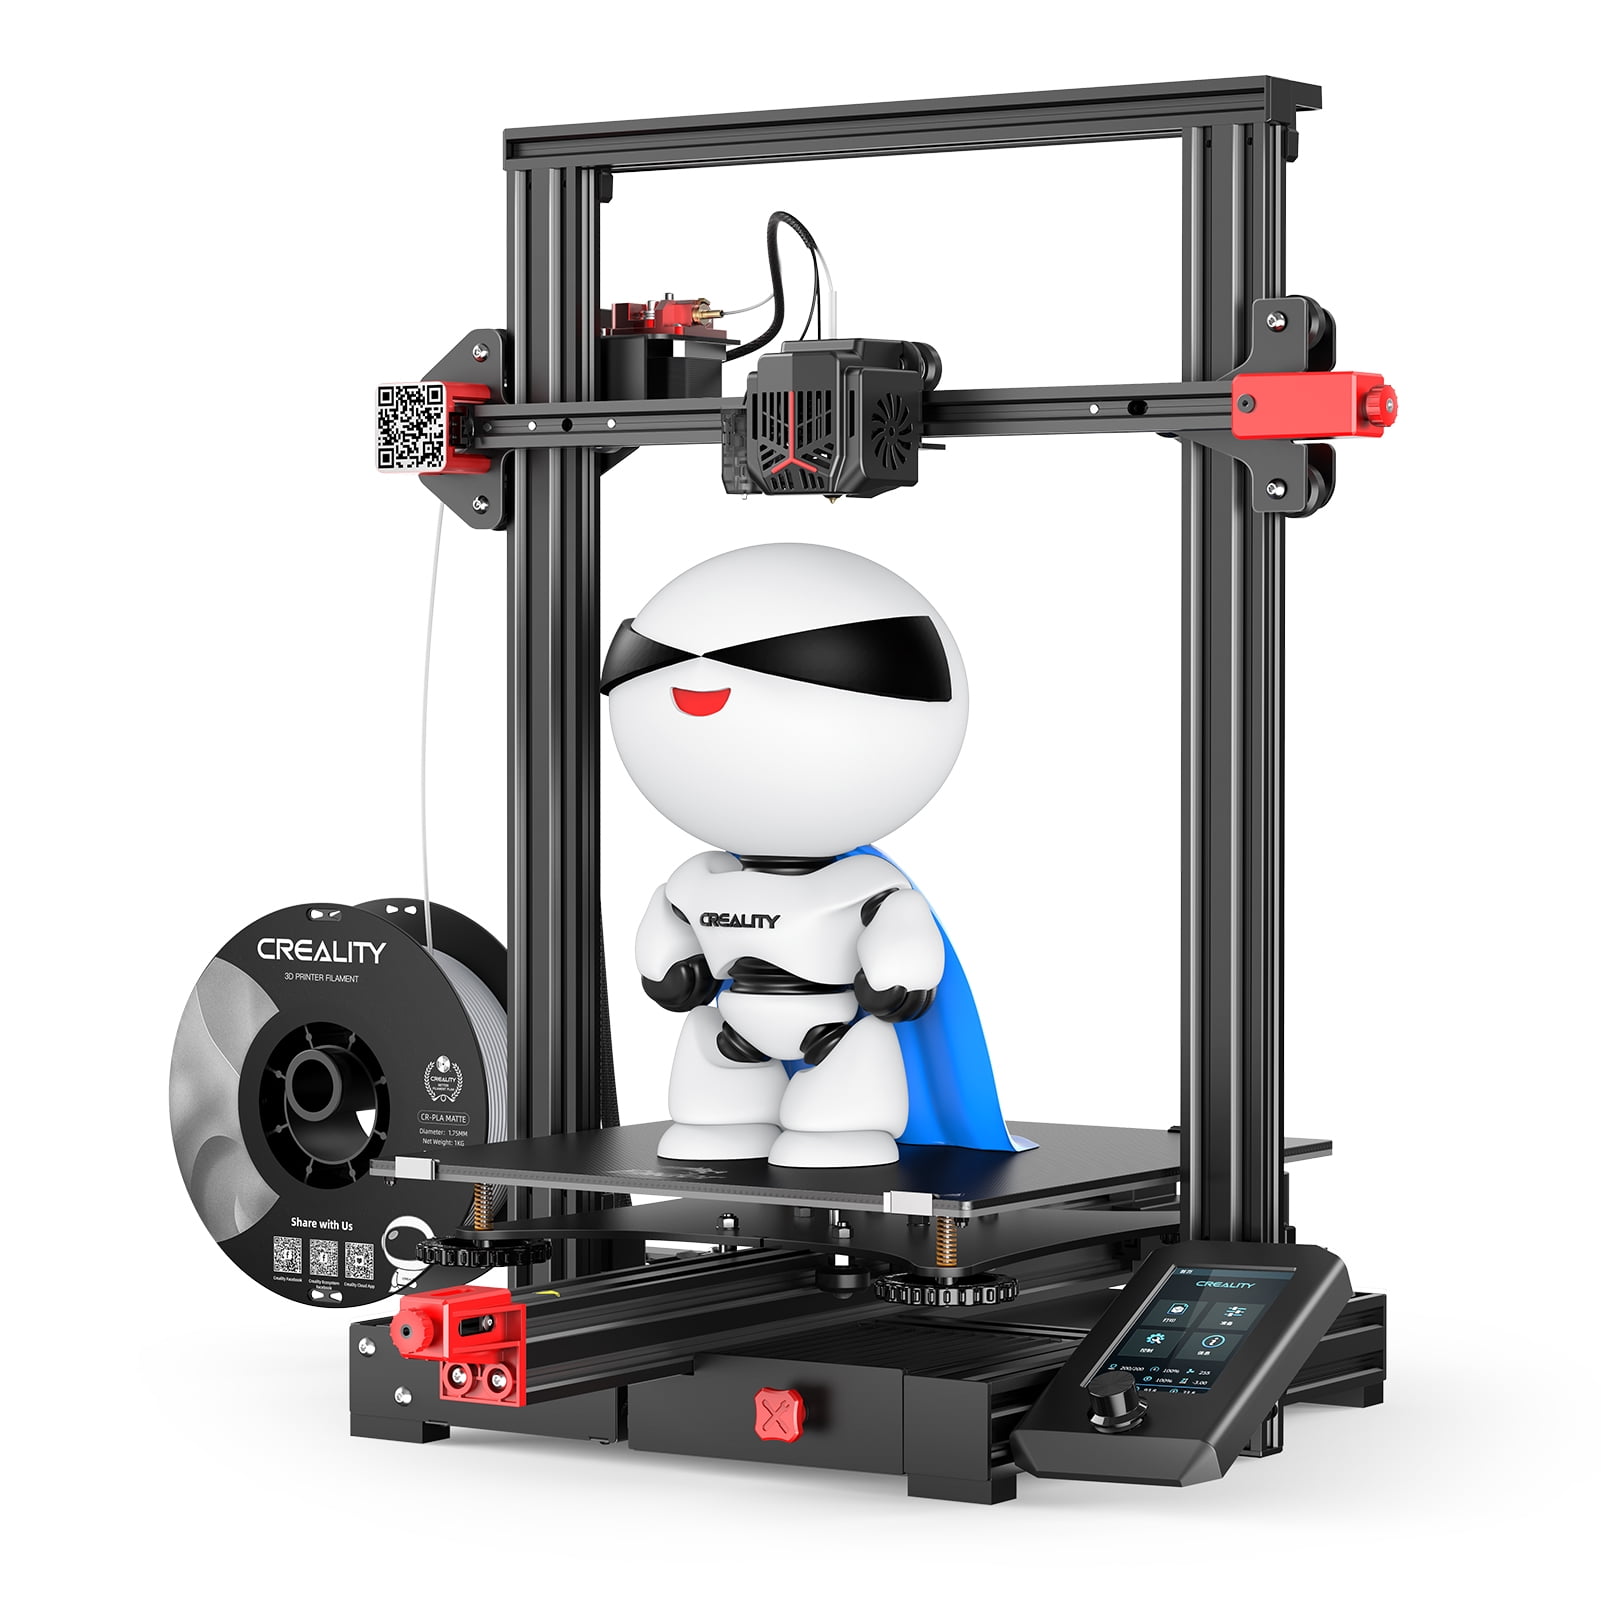 Creality 3D 3D Ender-3 Max Neo Desktop 3D Printer FDM 3D Printing  300x300x320 mm Print Size with Stable Dual Z- 4.3'' Color Knob Screen Full  Metal Extruder Support Resume Printing Filament Detection 